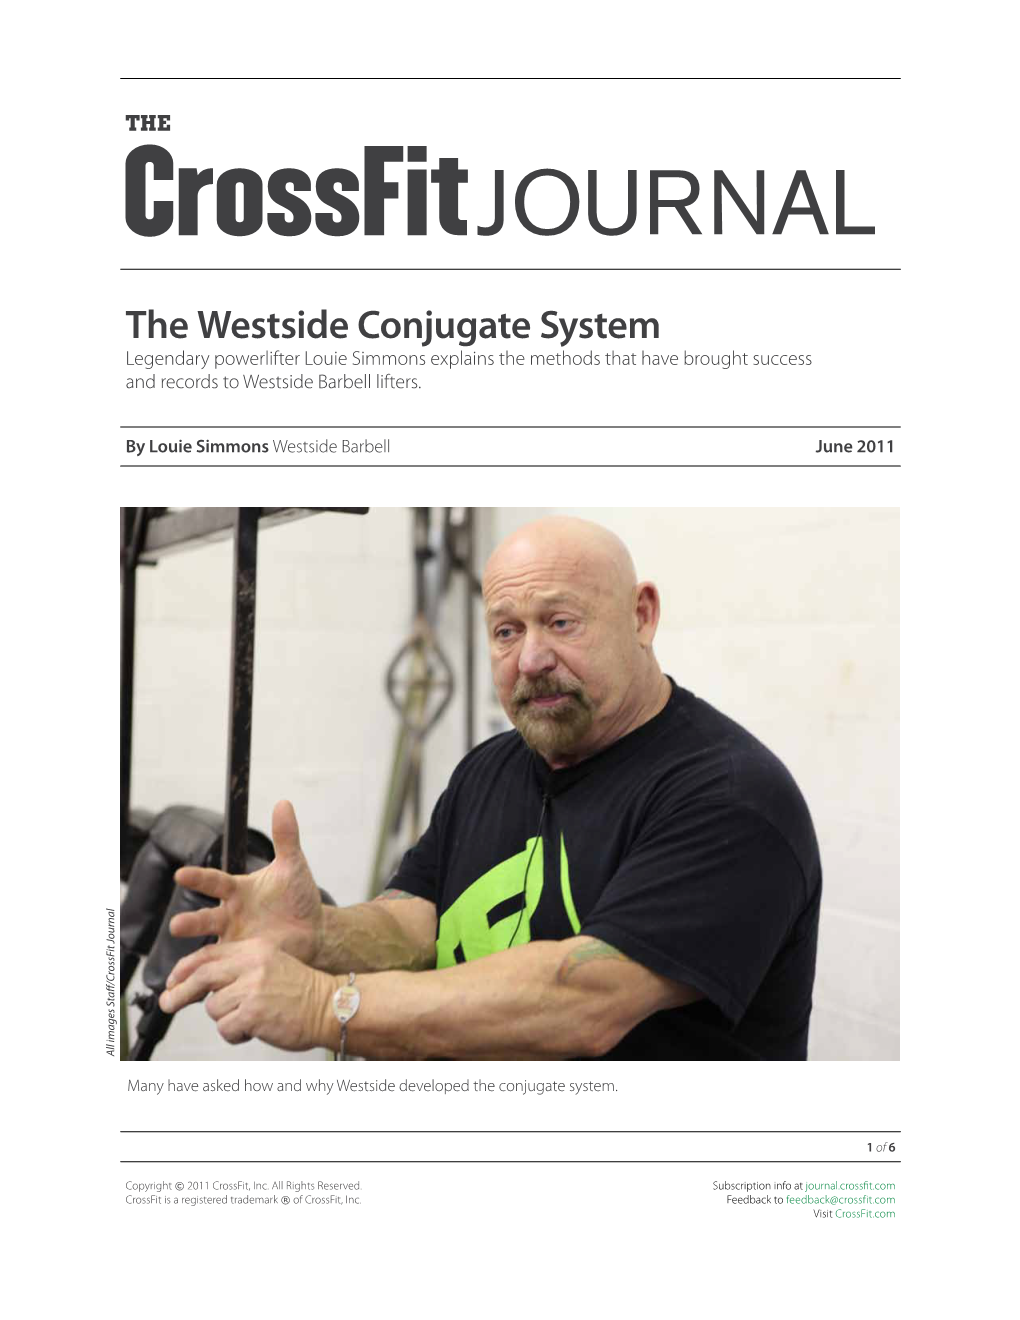 The Westside Conjugate System Legendary Powerlifter Louie Simmons Explains the Methods That Have Brought Success and Records to Westside Barbell Lifters